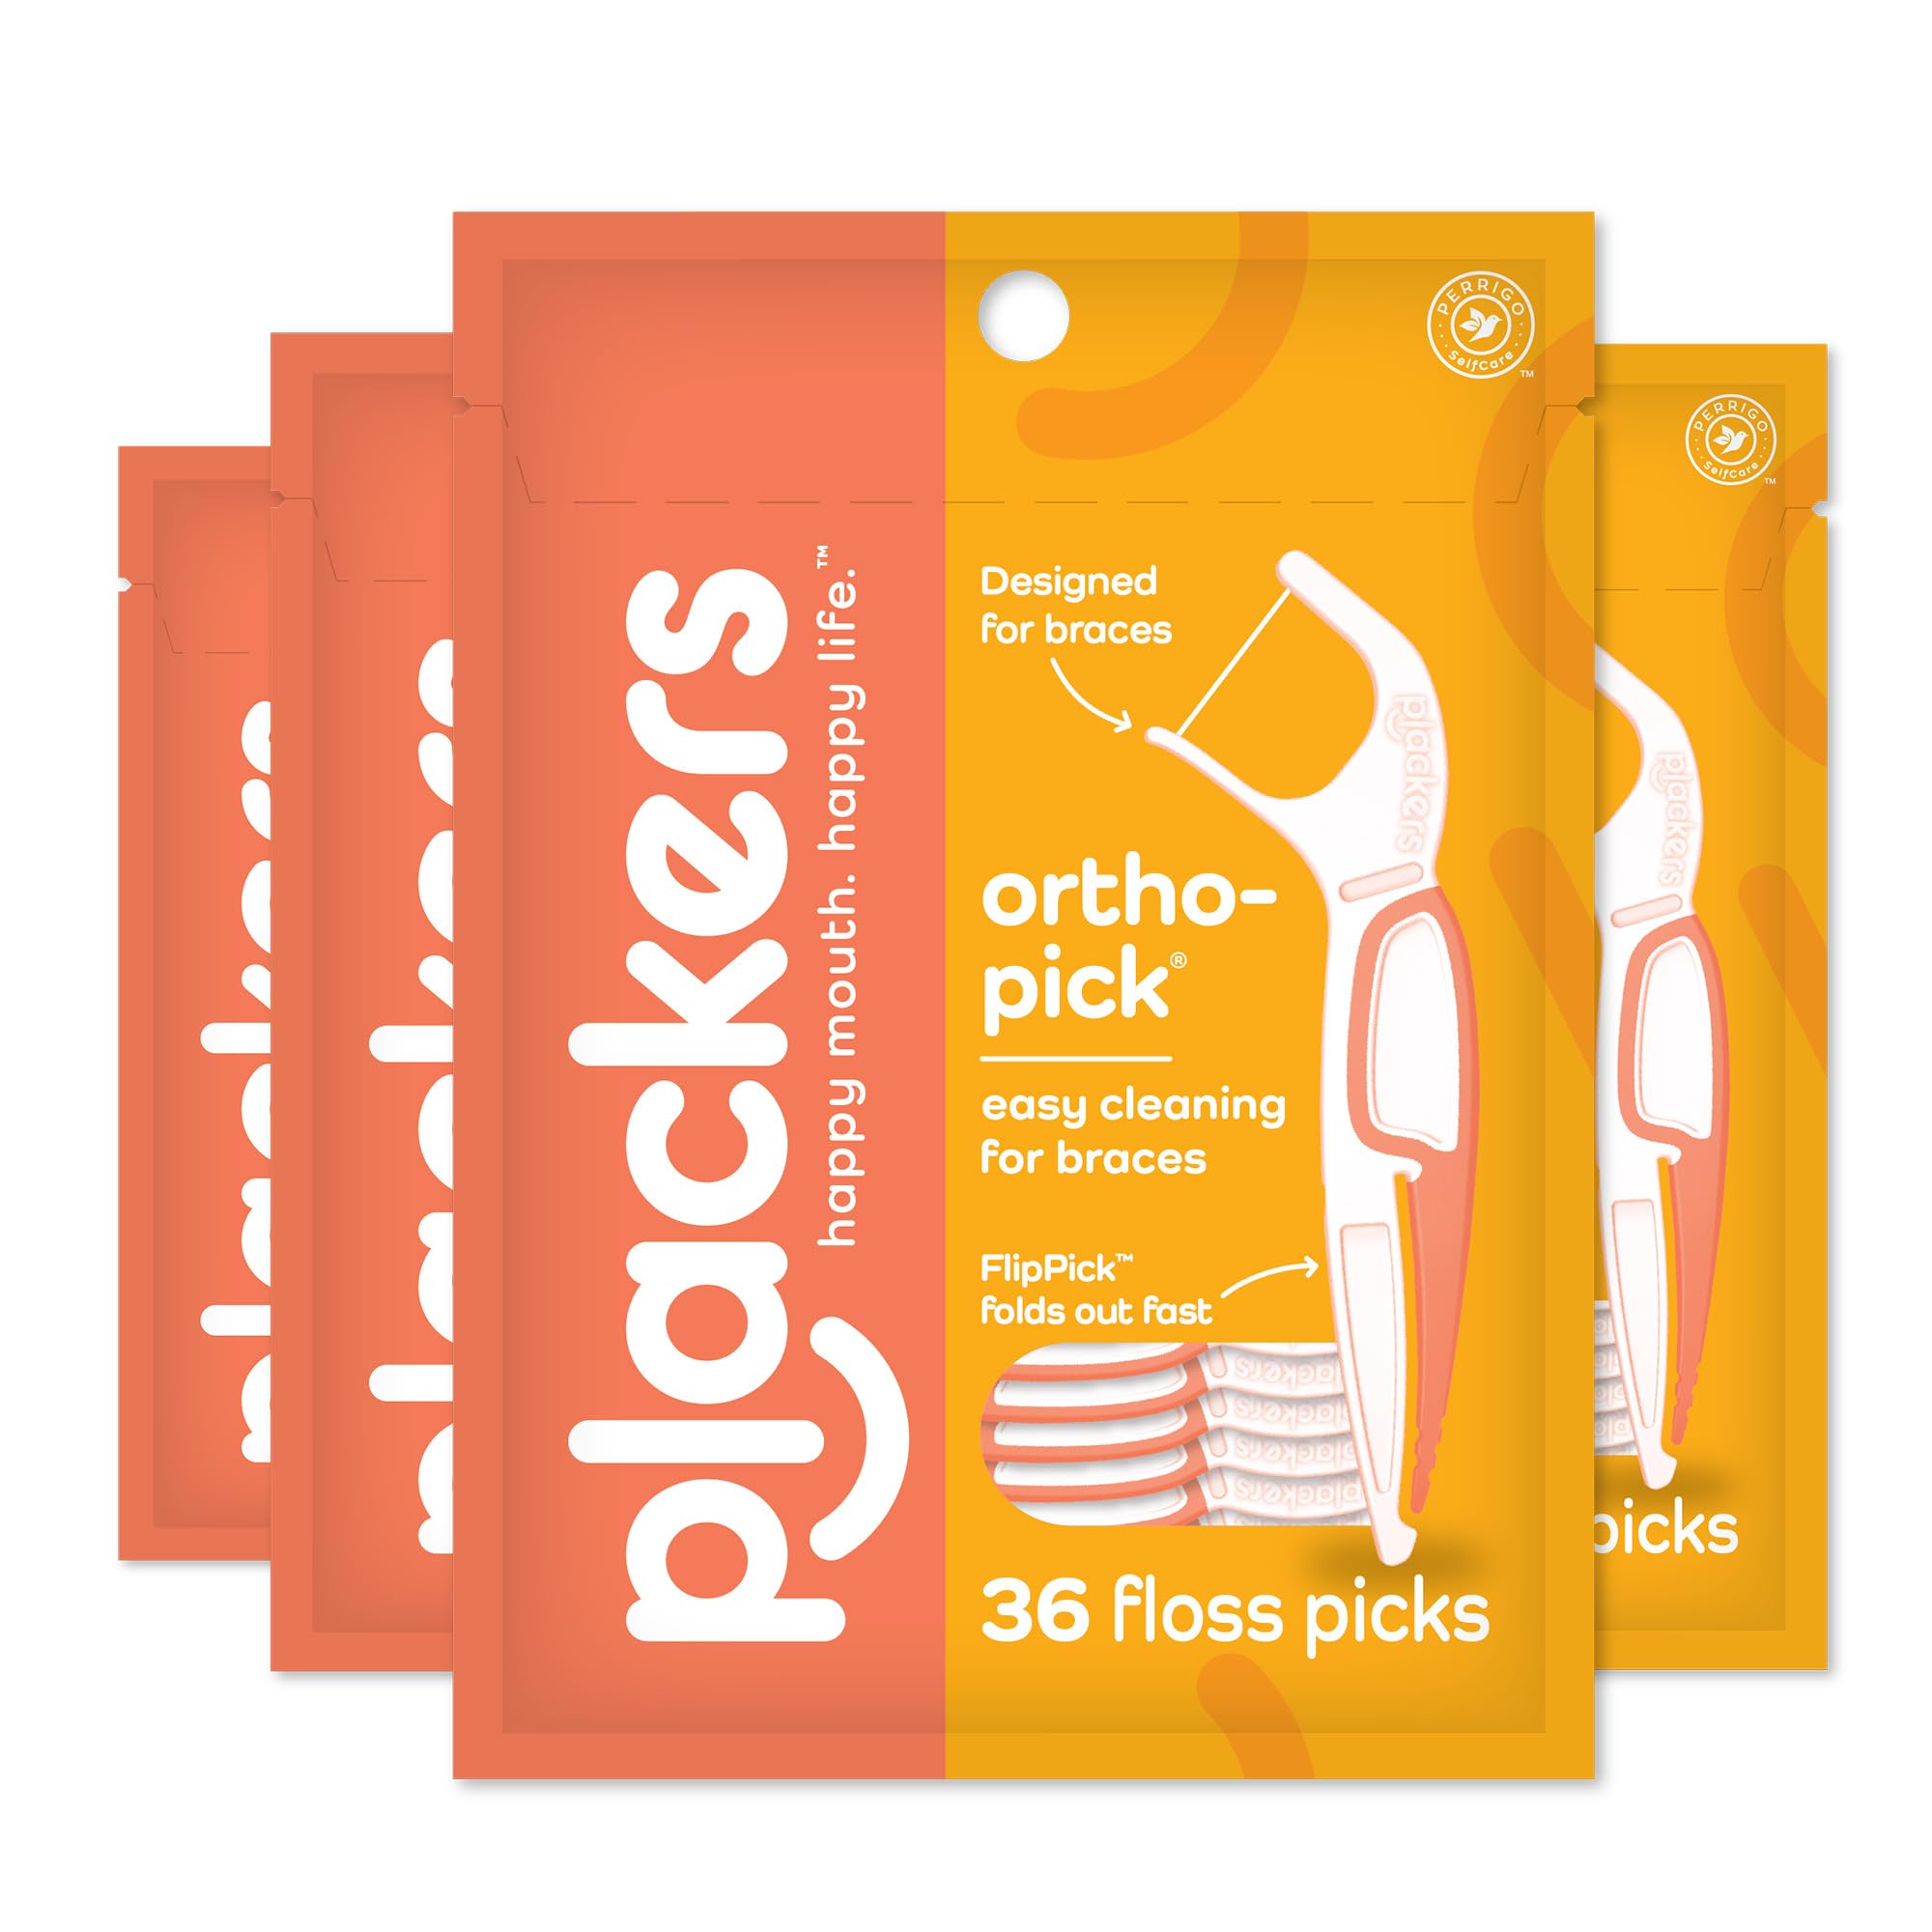 4-Pack 36-Count Plackers Orthopick Floss Picks Designed for Braces, Fold-Out FlipPick w/ Tuffloss $6.30 (.04c Ea) w/S&S + Free Shipping w/ Prime or on $35+